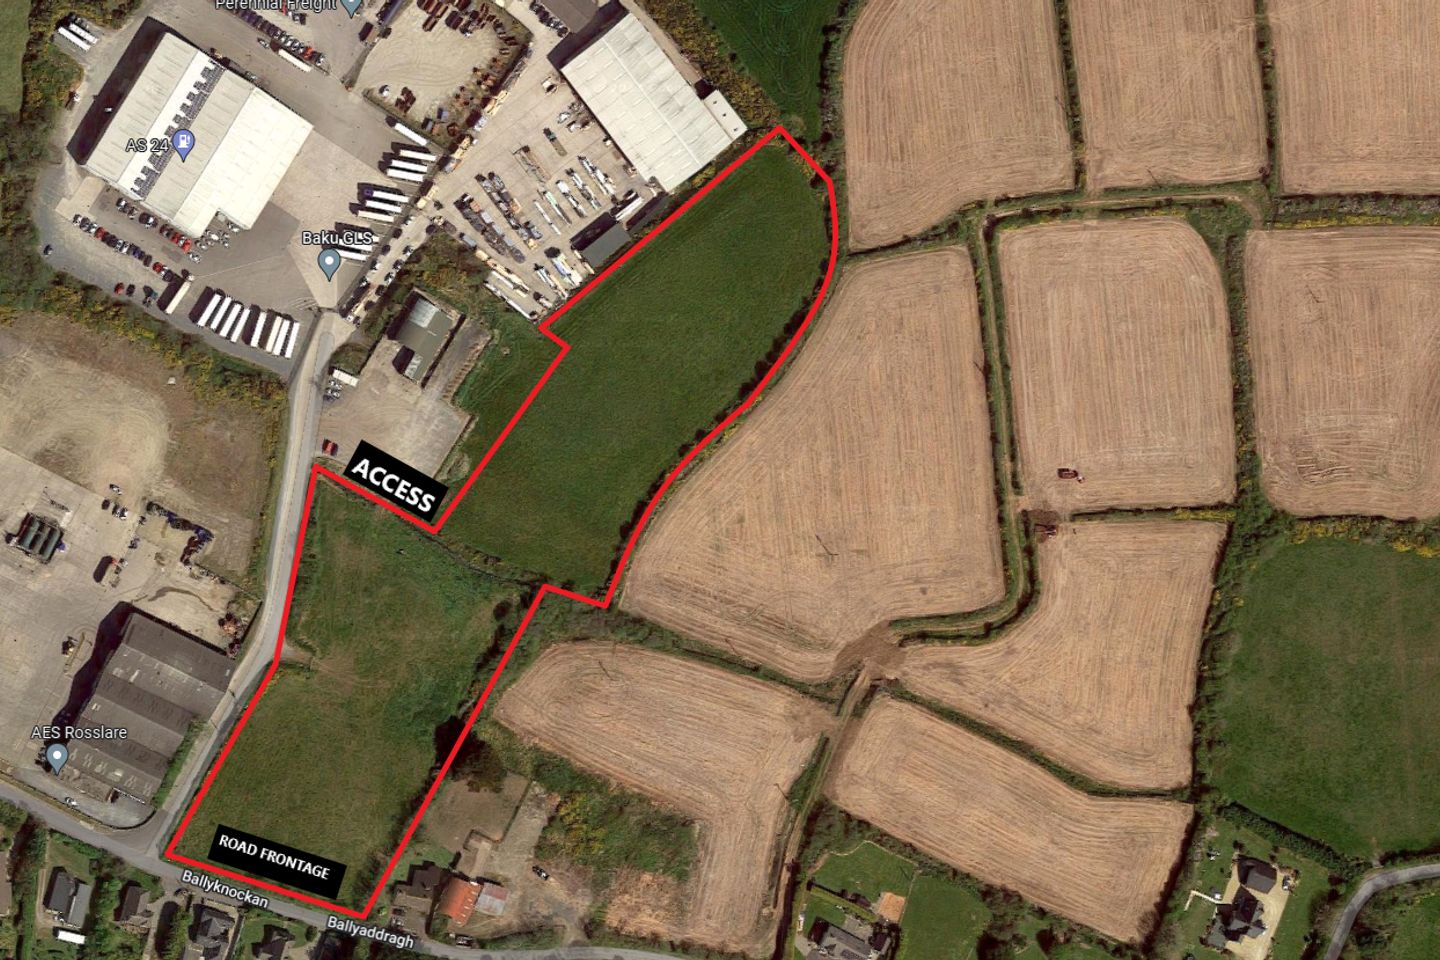 Compact c. 5.8 Acre Holding (Zoned Light Industrial) at Kilrane, Rosslare Harbour, Co. Wexford